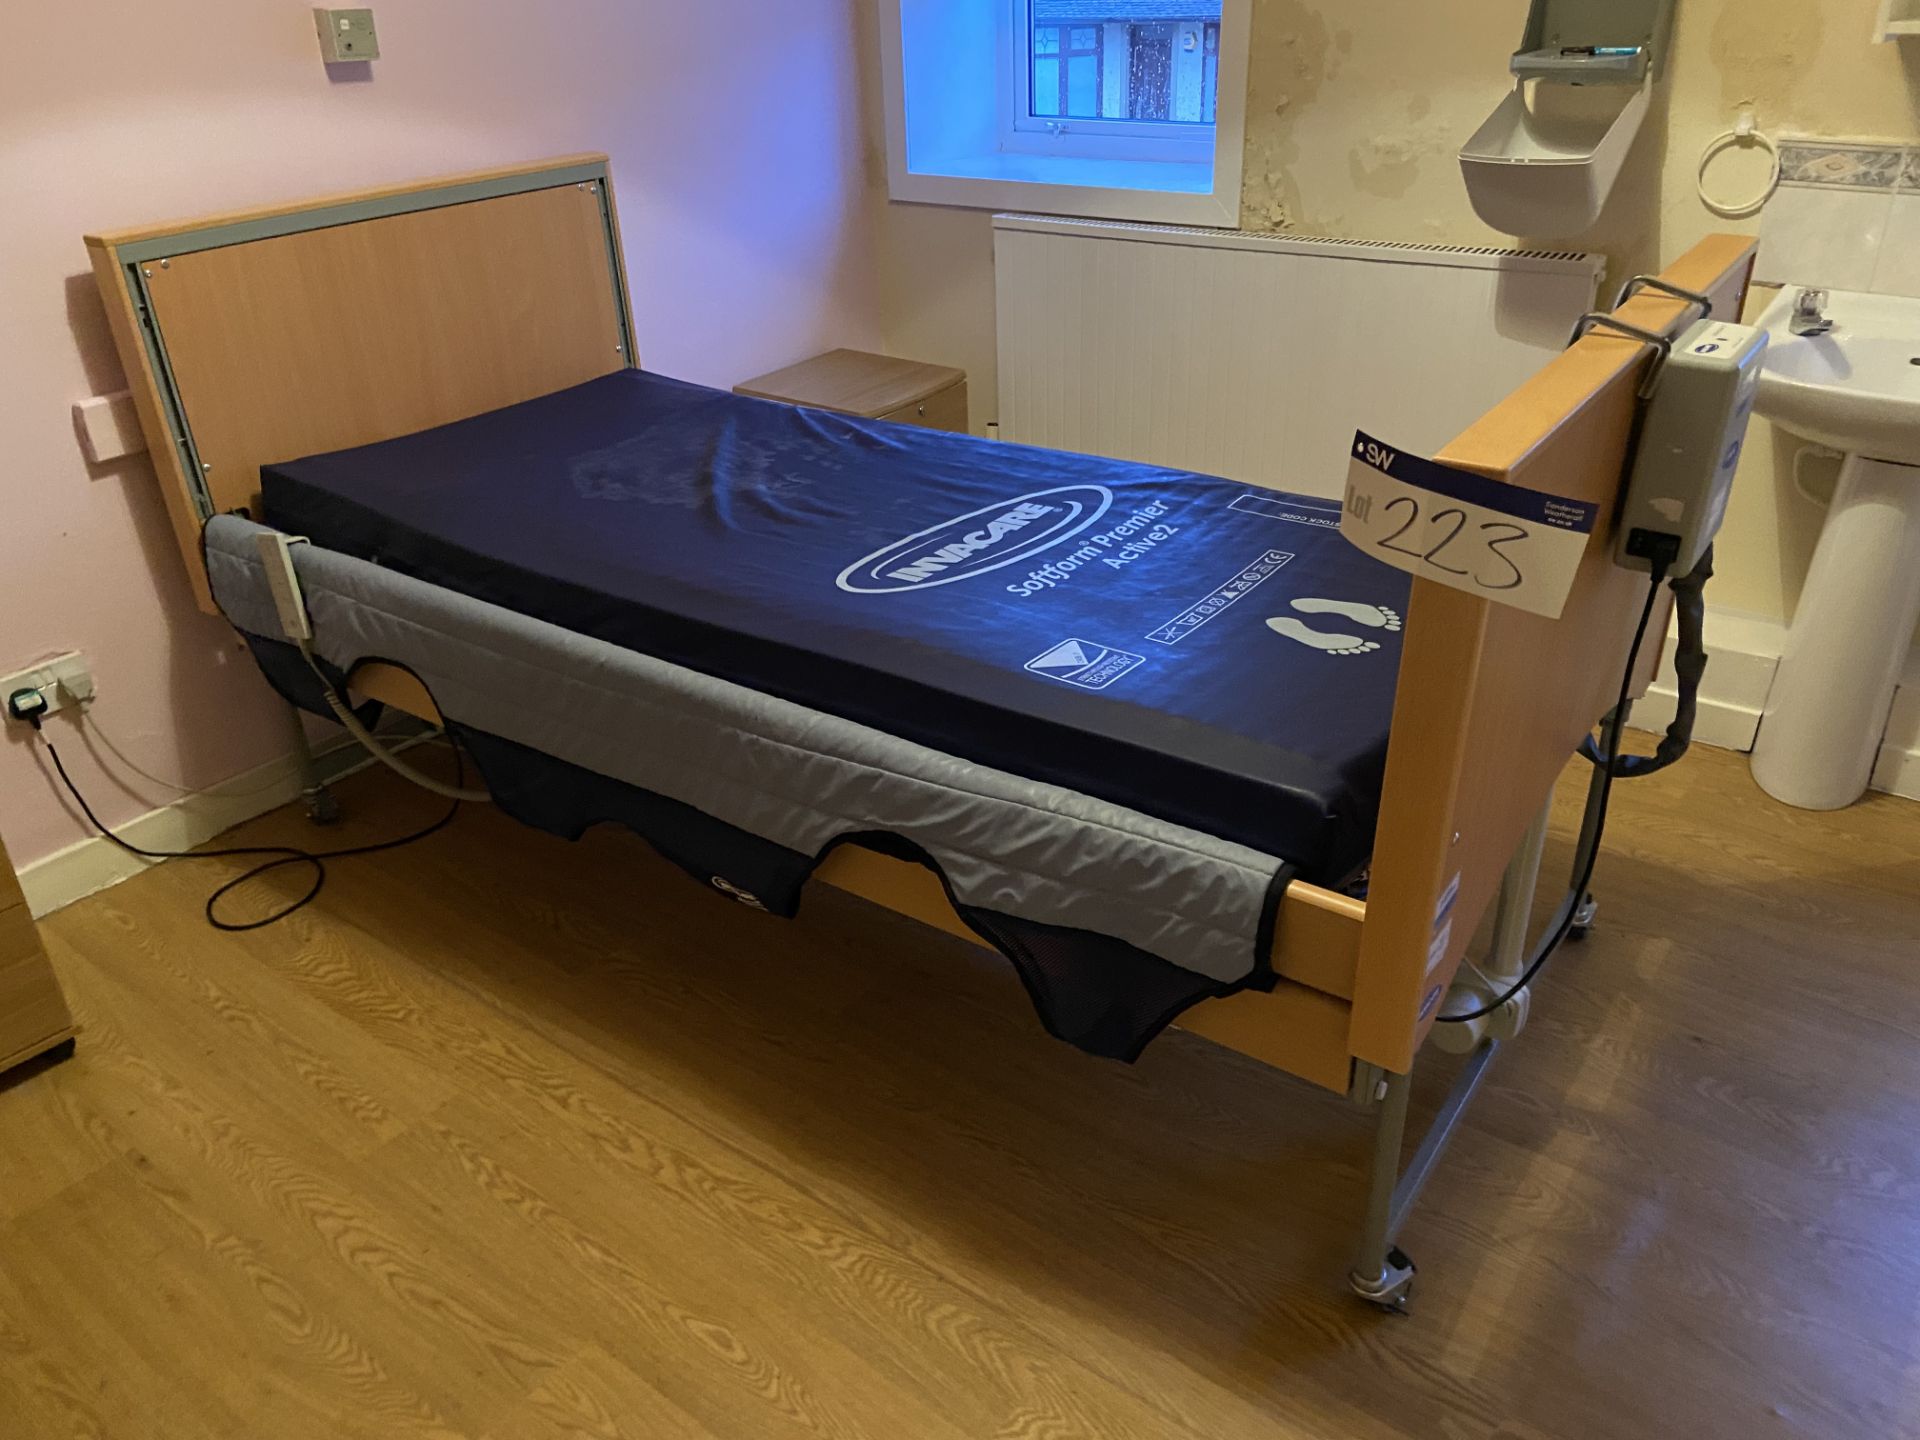 Invacare Mobile Adjustable Height Bed Frame, with Invacare soft foam premier active 2 mattress and